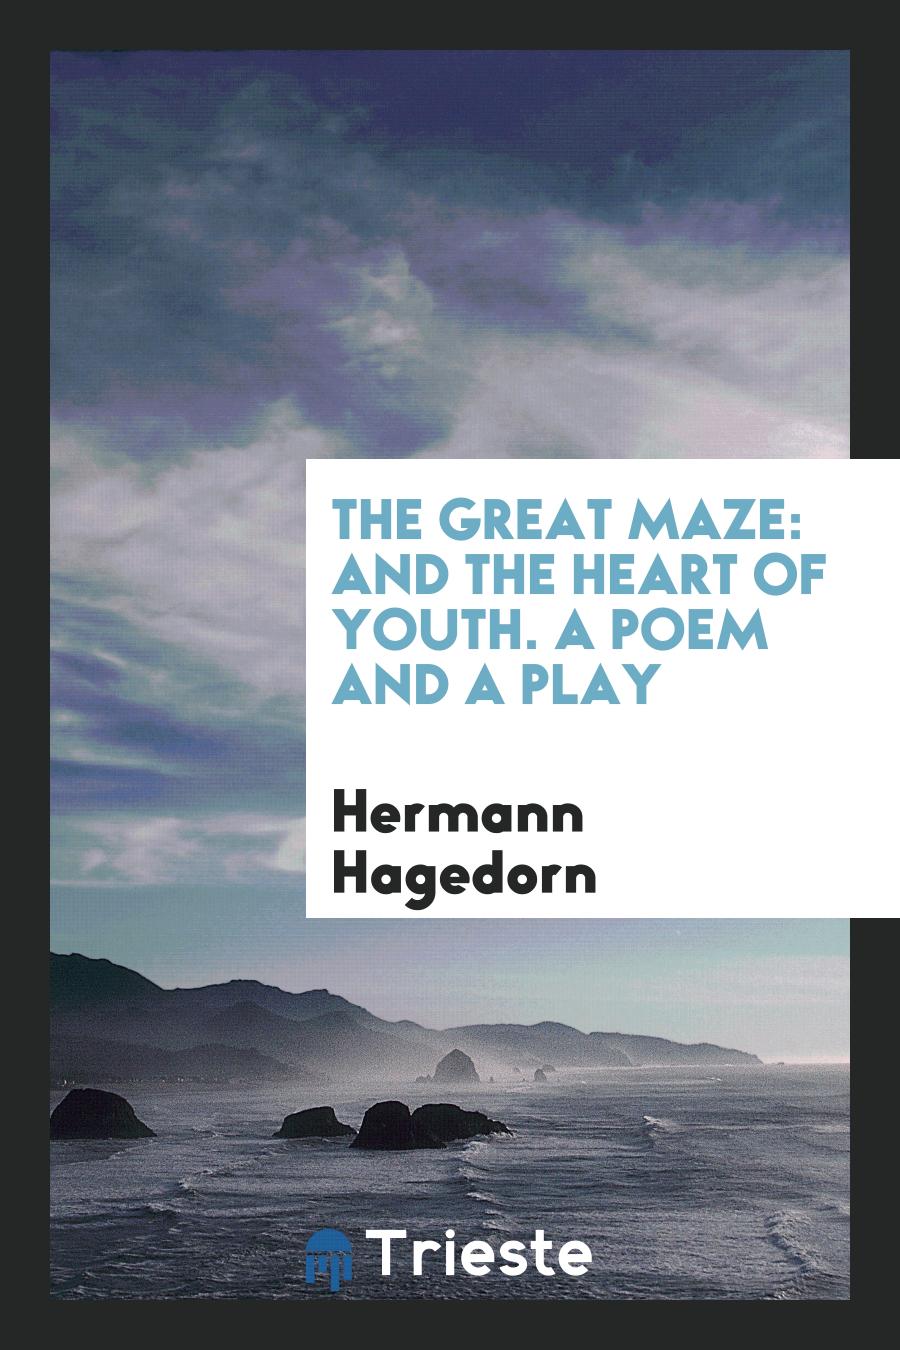 The Great Maze: And the Heart of Youth. A Poem and a Play